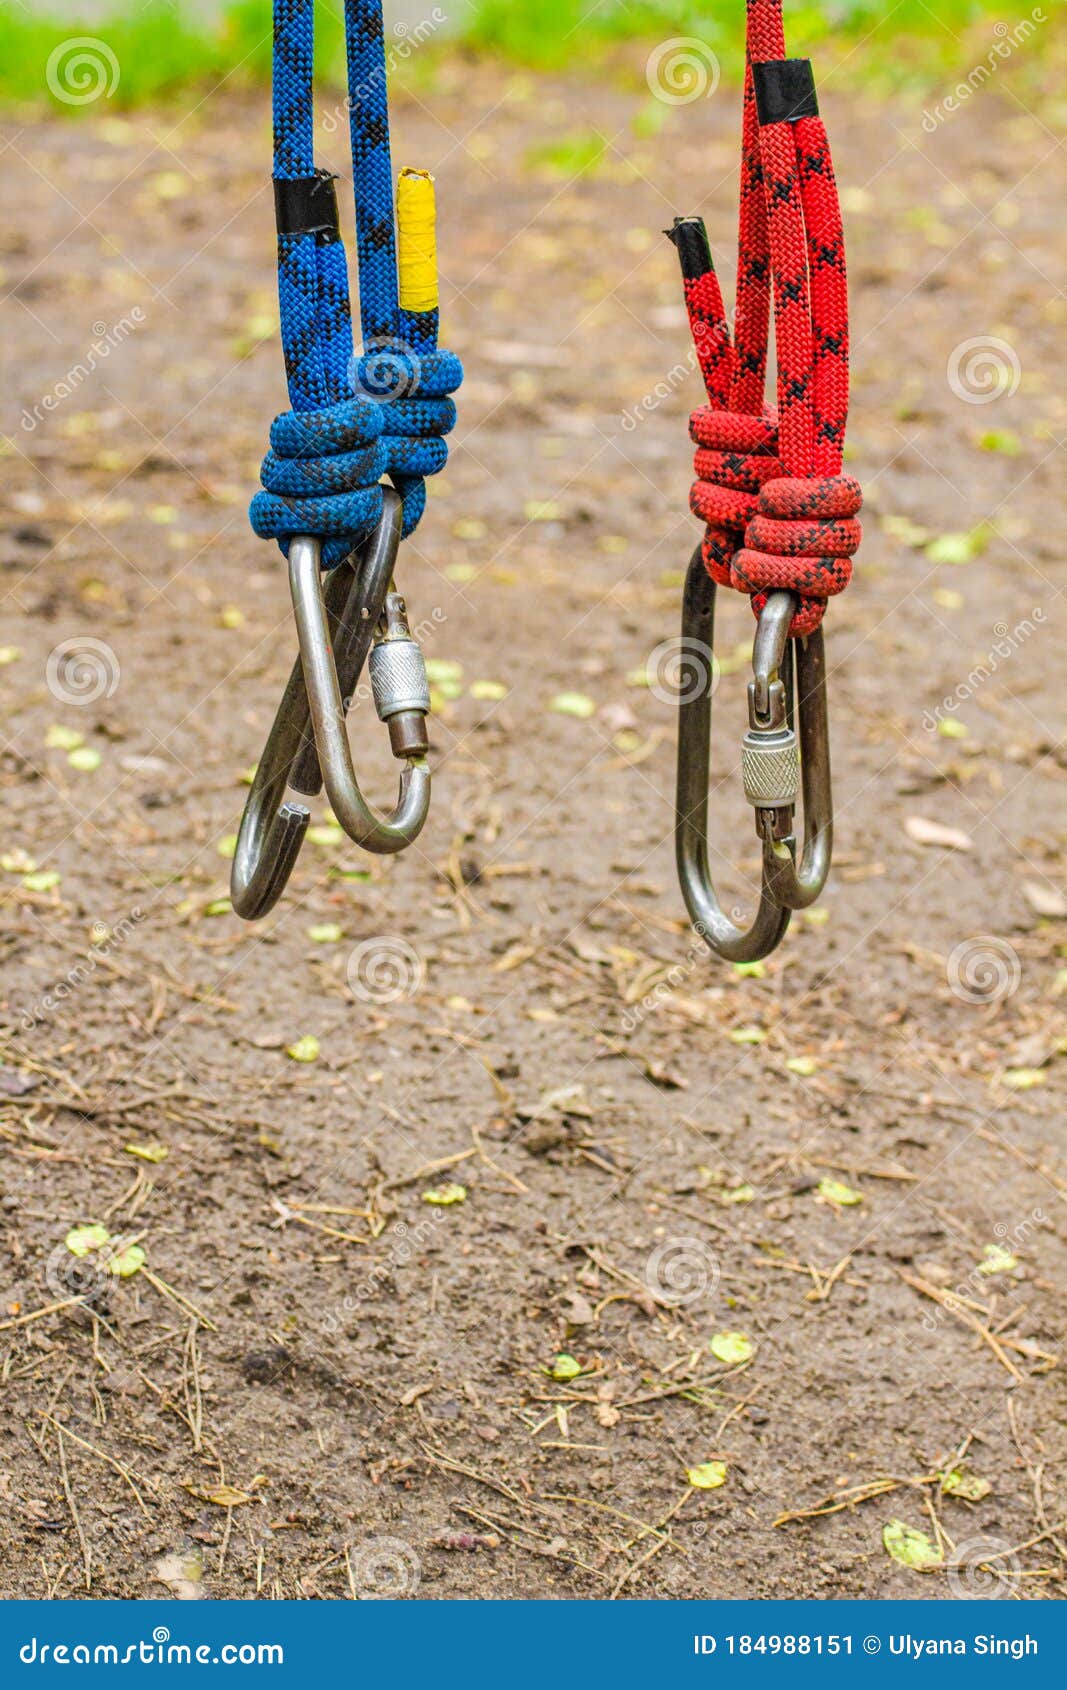 https://thumbs.dreamstime.com/z/image-carabine-hooks-blue-red-climbing-ropes-hanging-down-shackles-attached-to-lines-rope-hitch-adventure-park-copy-184988151.jpg